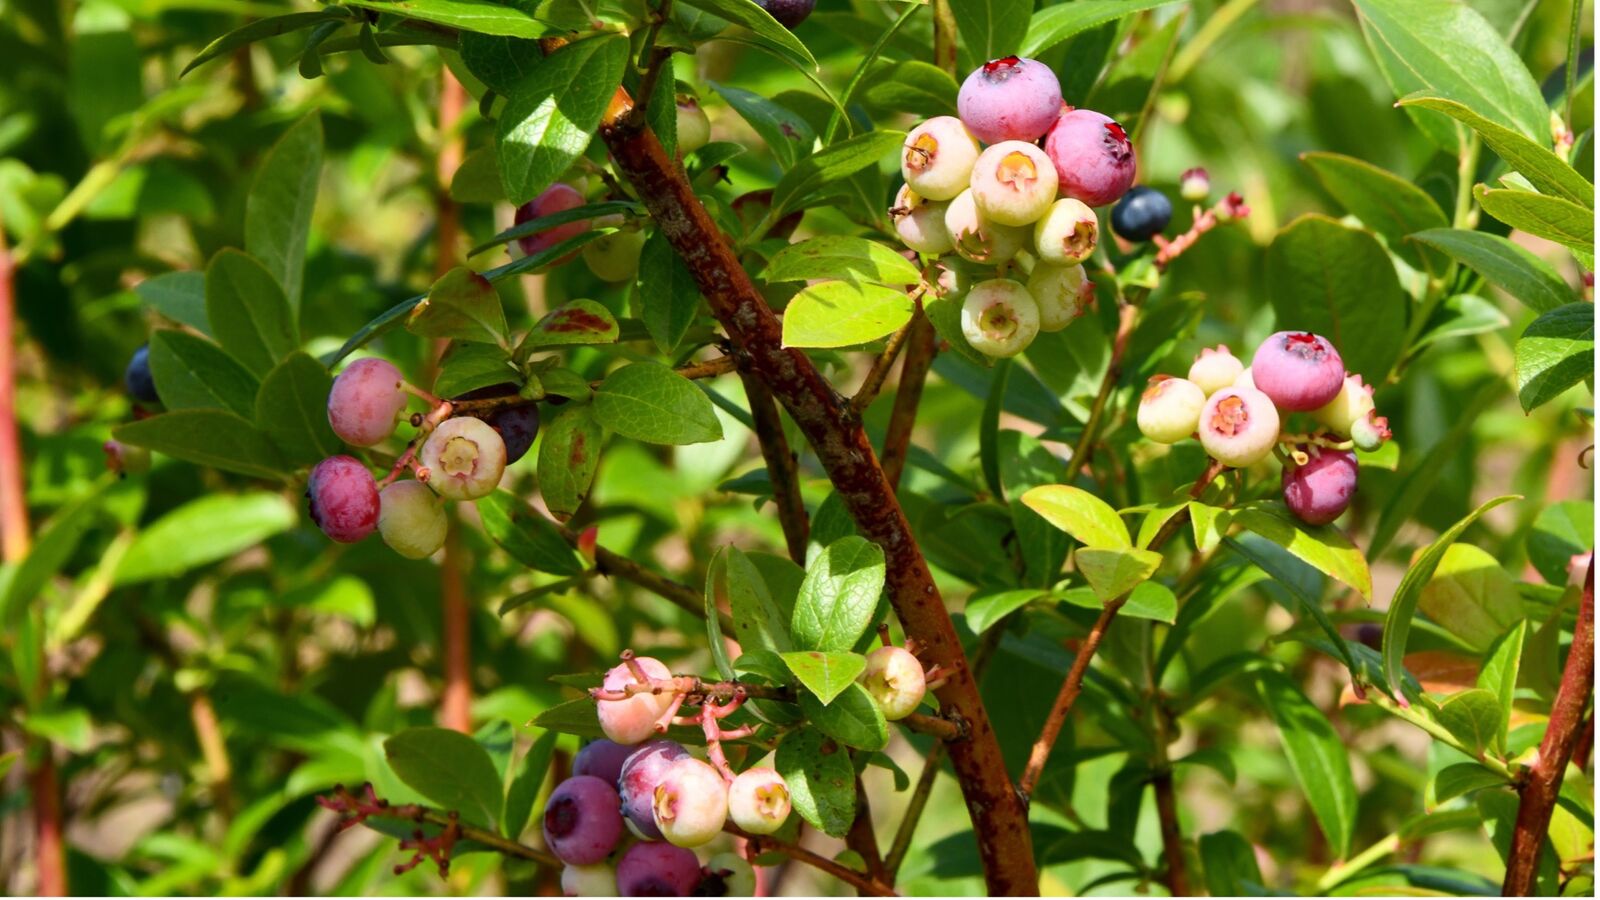 Blueberries: the right time to harvest